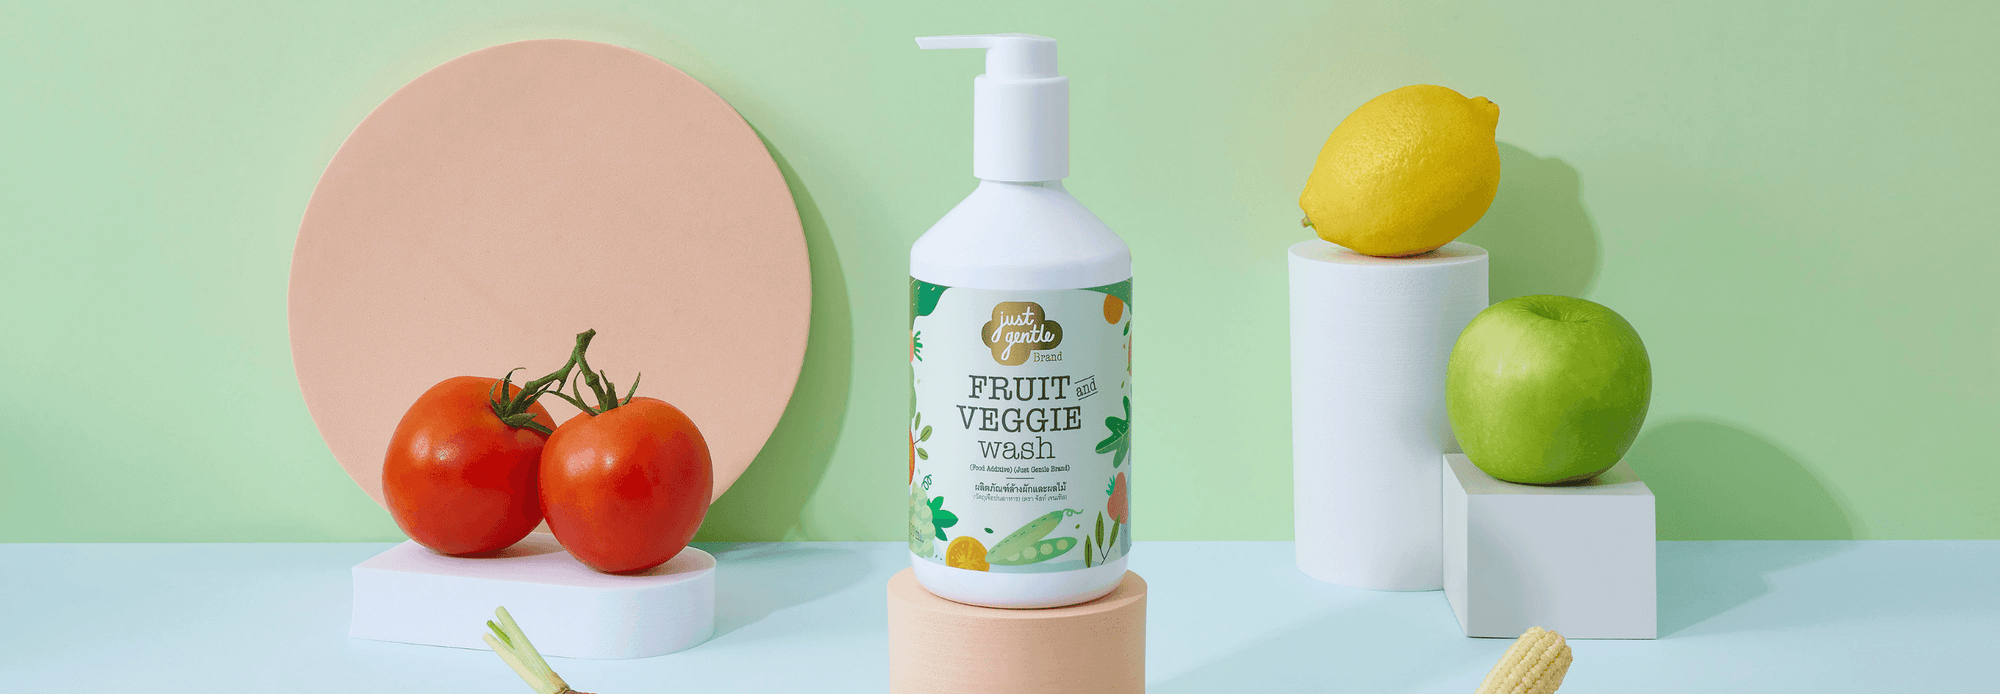 Just Gentle Organic Fruit and Veggie Wash - Just Gentle Middle East